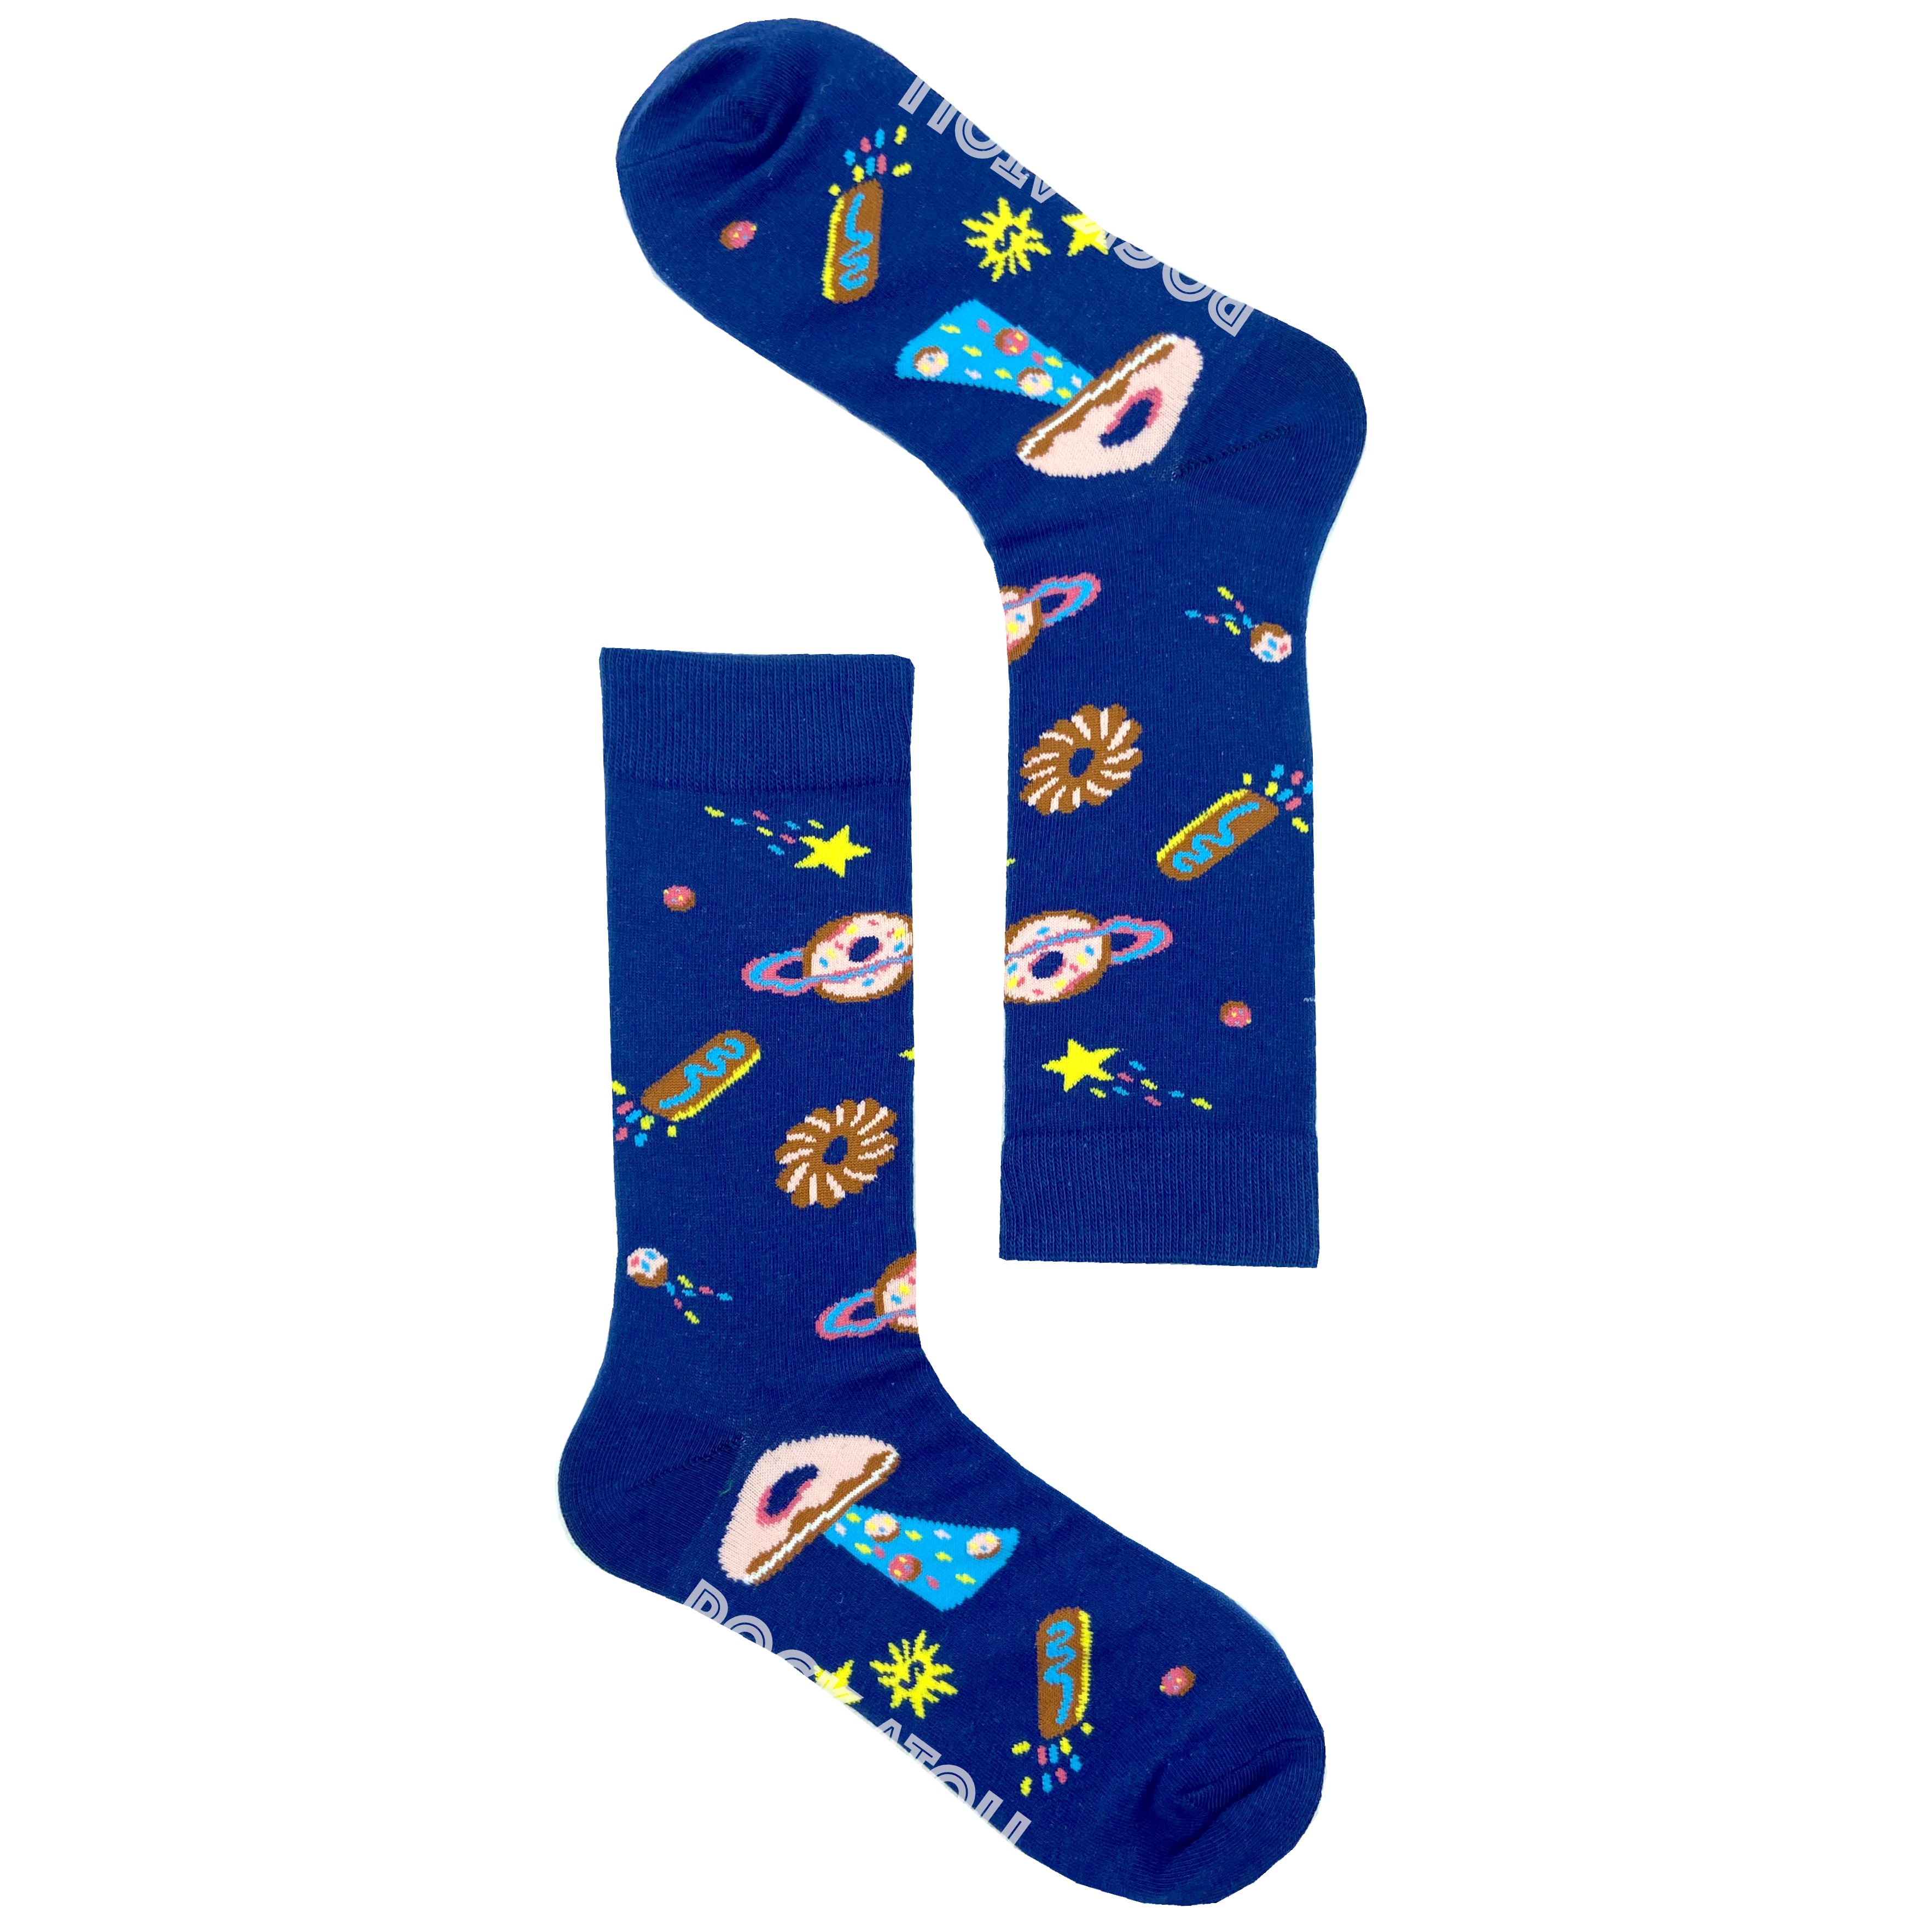 Donut Coughnuts in Outer Space Patterned Universe Themed Novelty Socks